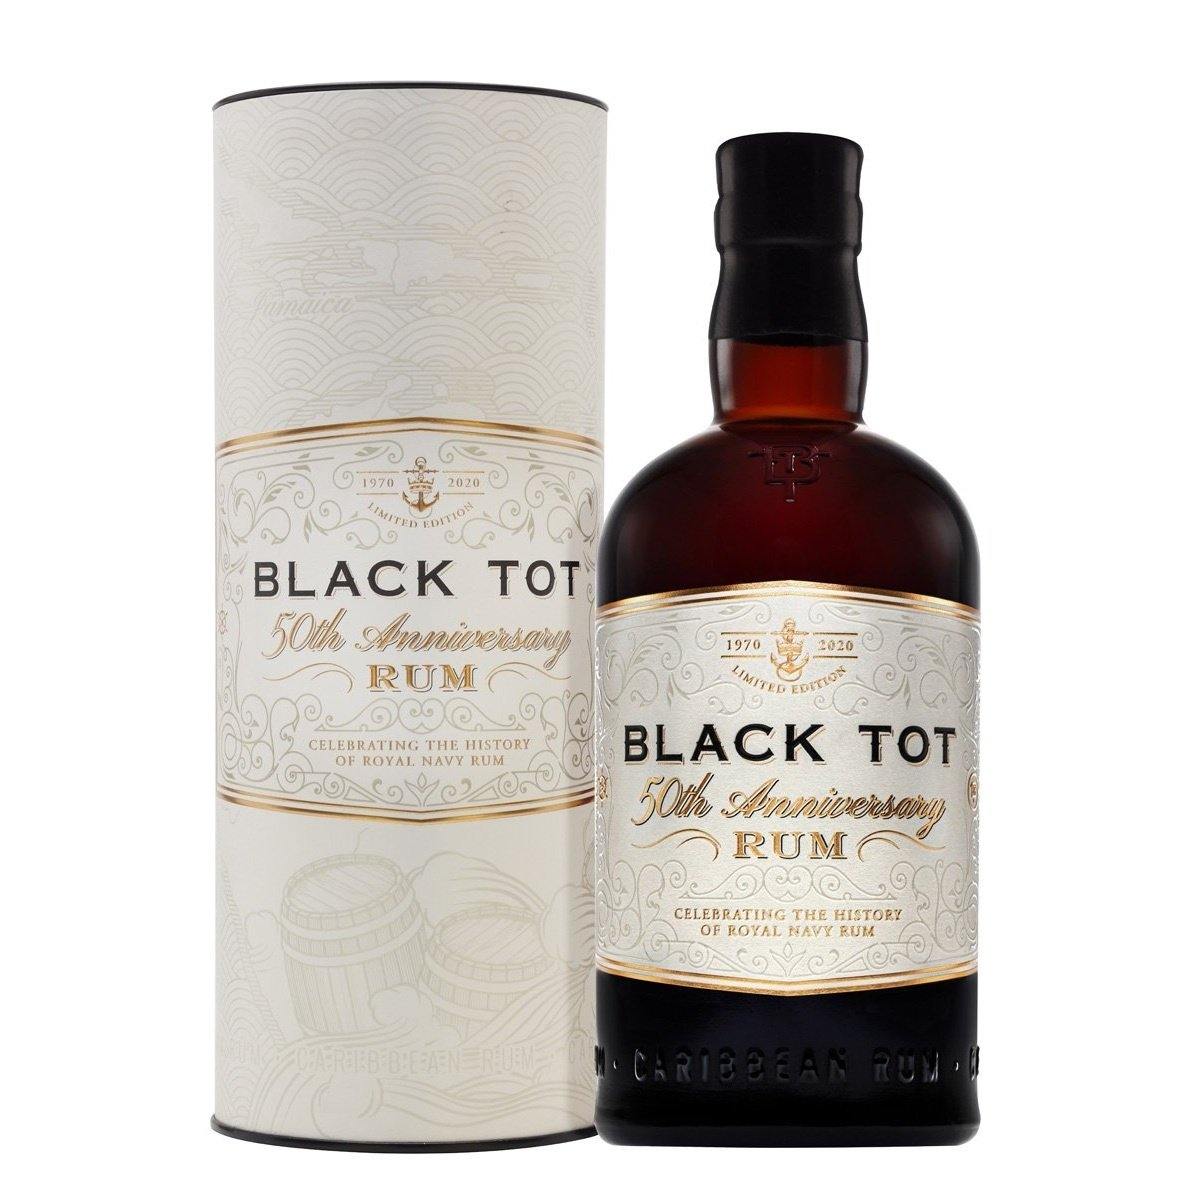 The Black Tot 50th Anniversary Caribbean Rum Limited Edition - De Wine Spot | DWS - Drams/Whiskey, Wines, Sake